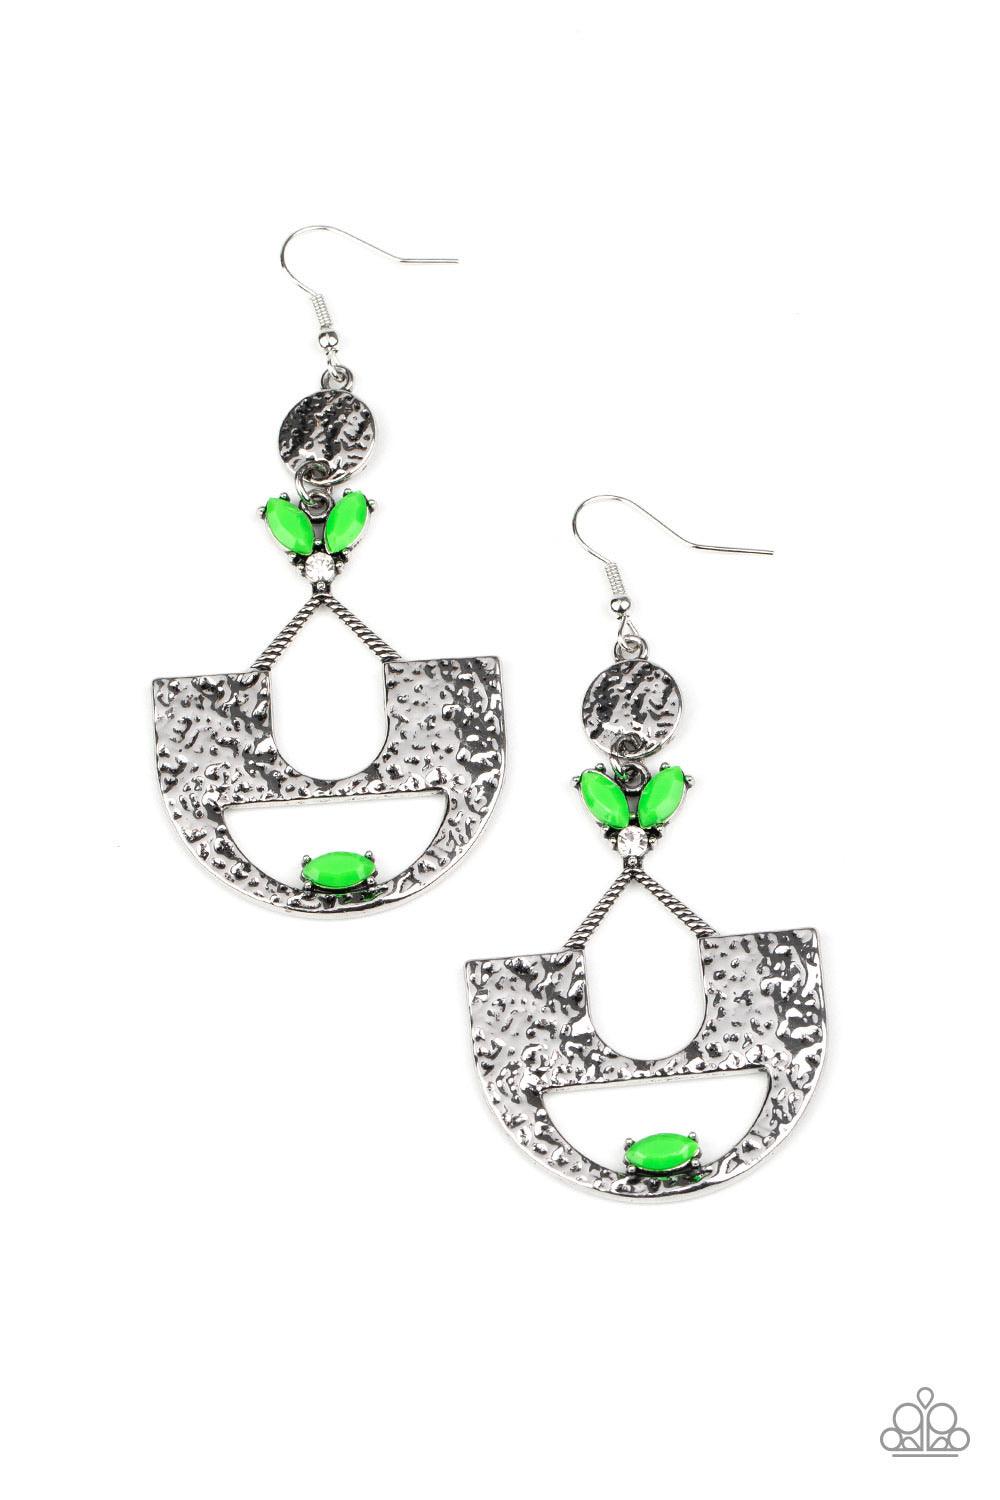 Paparazzi Accessories Modern Day Mecca - Green Featuring a glittery white rhinestone and faceted neon green beading, an abstract crescent frame attaches to a hammered silver disc, creating a colorfully rustic lure. Earring attaches to a standard fishhook